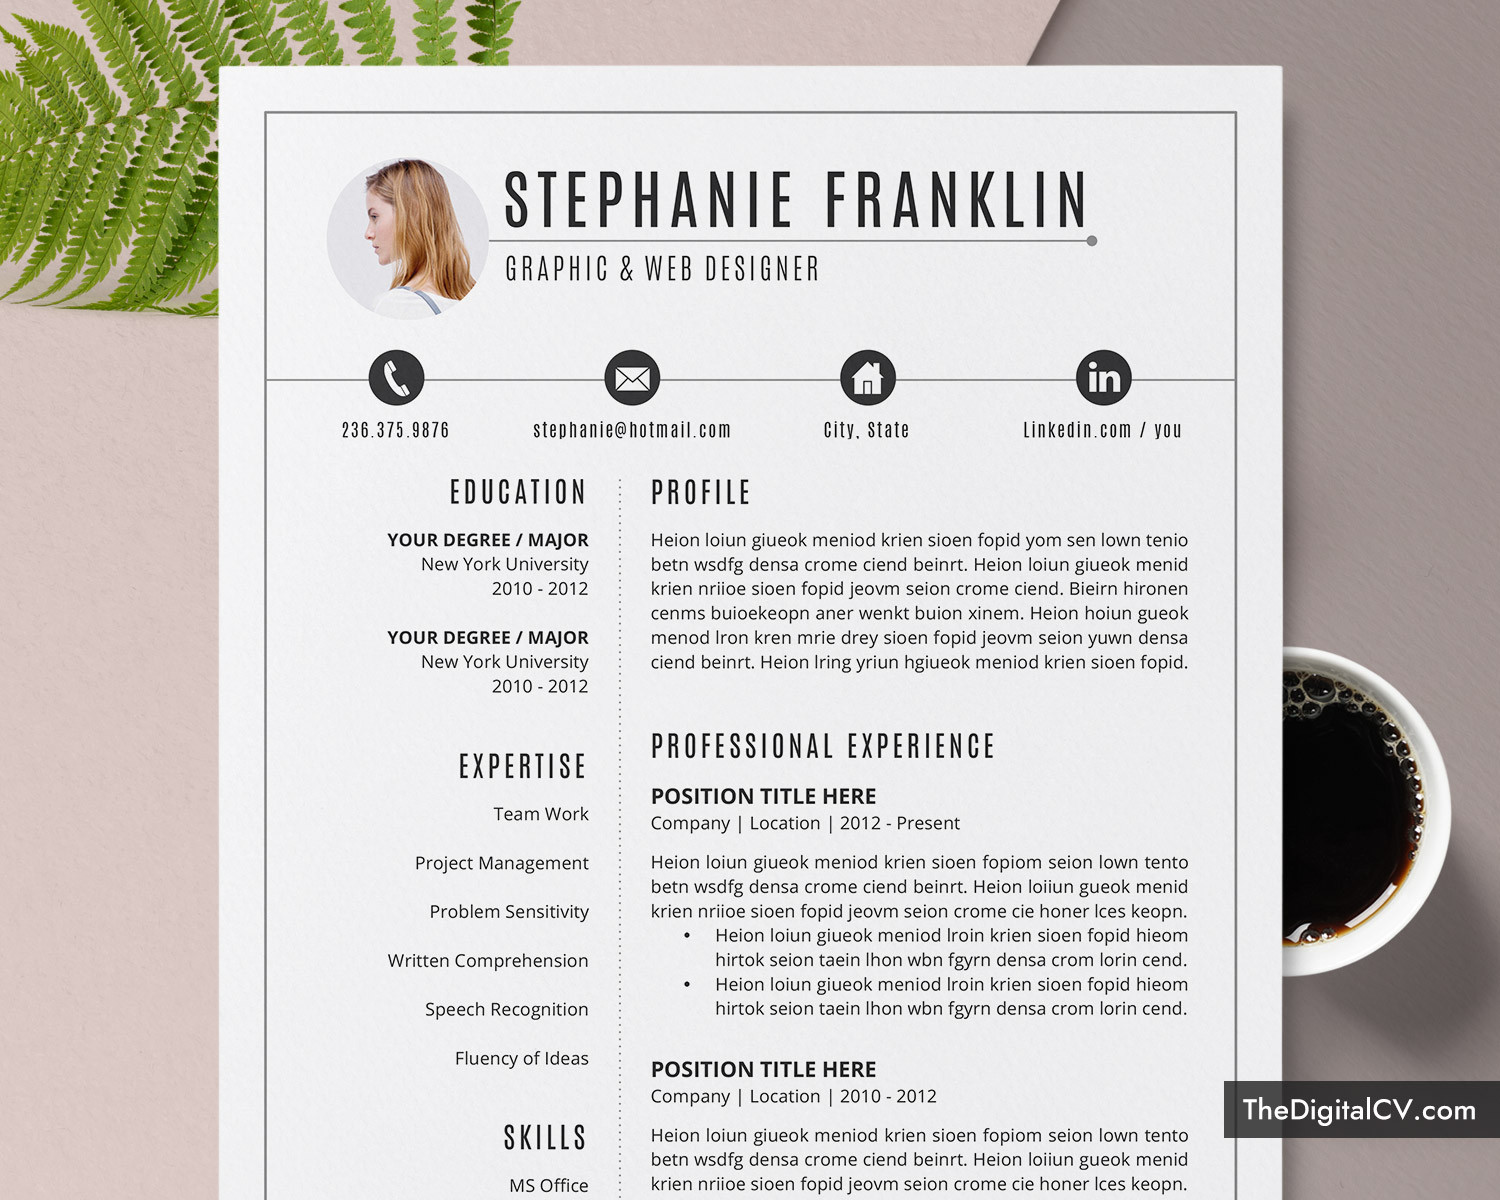 resume templates cv templates cover letter resume editing guide for students interns college graduates mea graduates experienced professionals and career changers stephanie resume